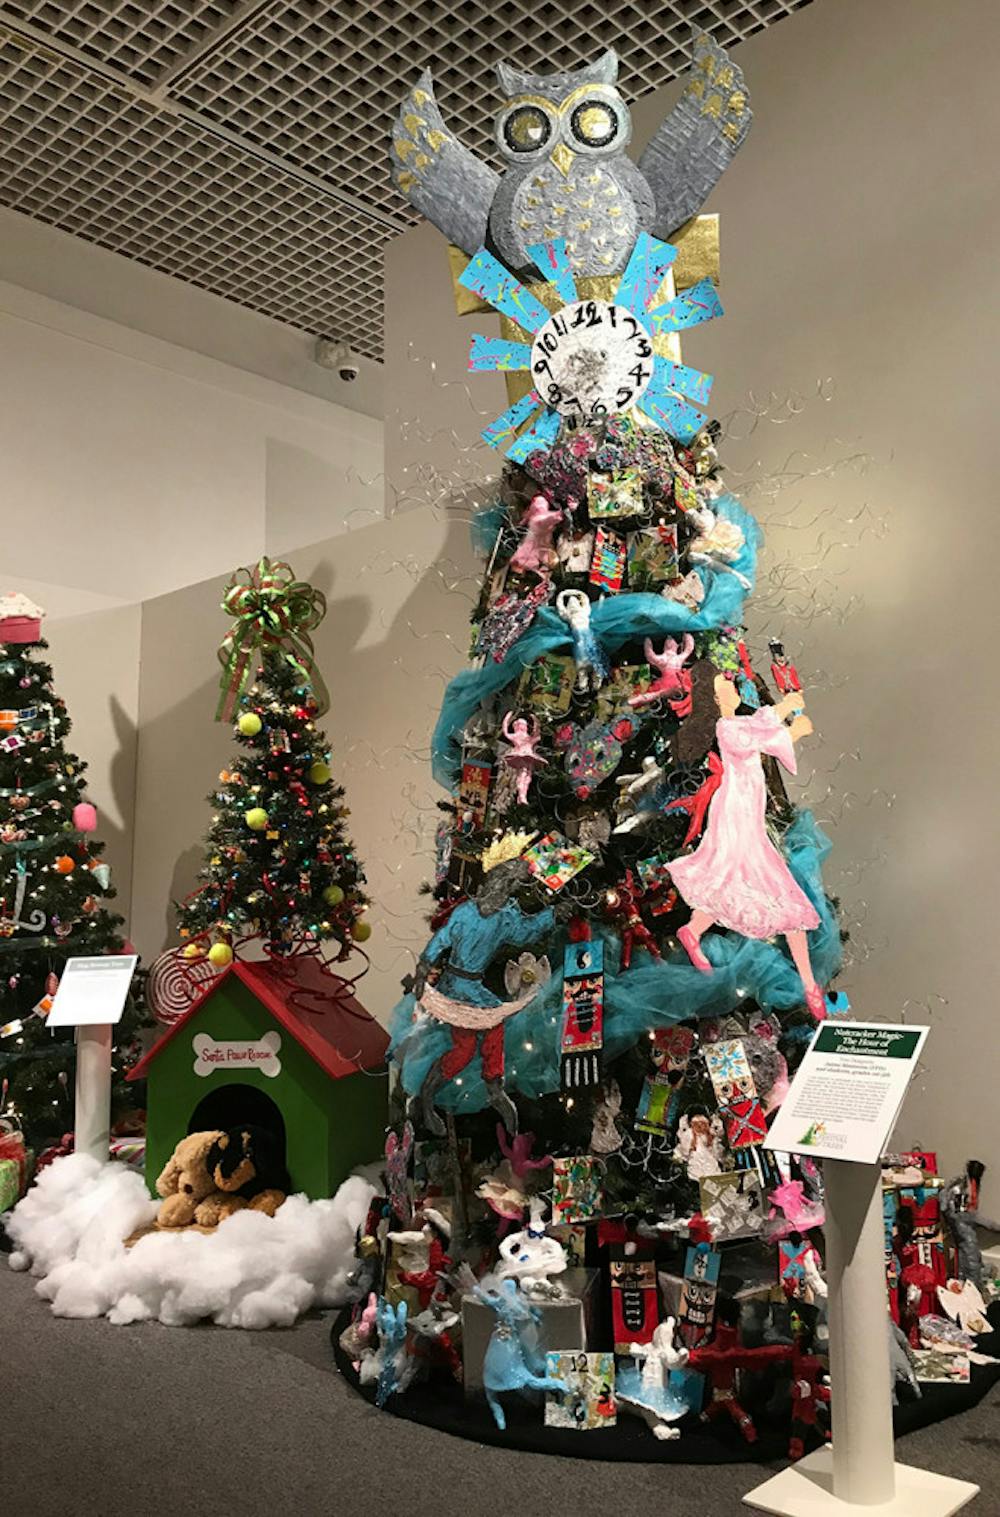 The famed Nutcracker ballet is this year's Festival of Trees theme.